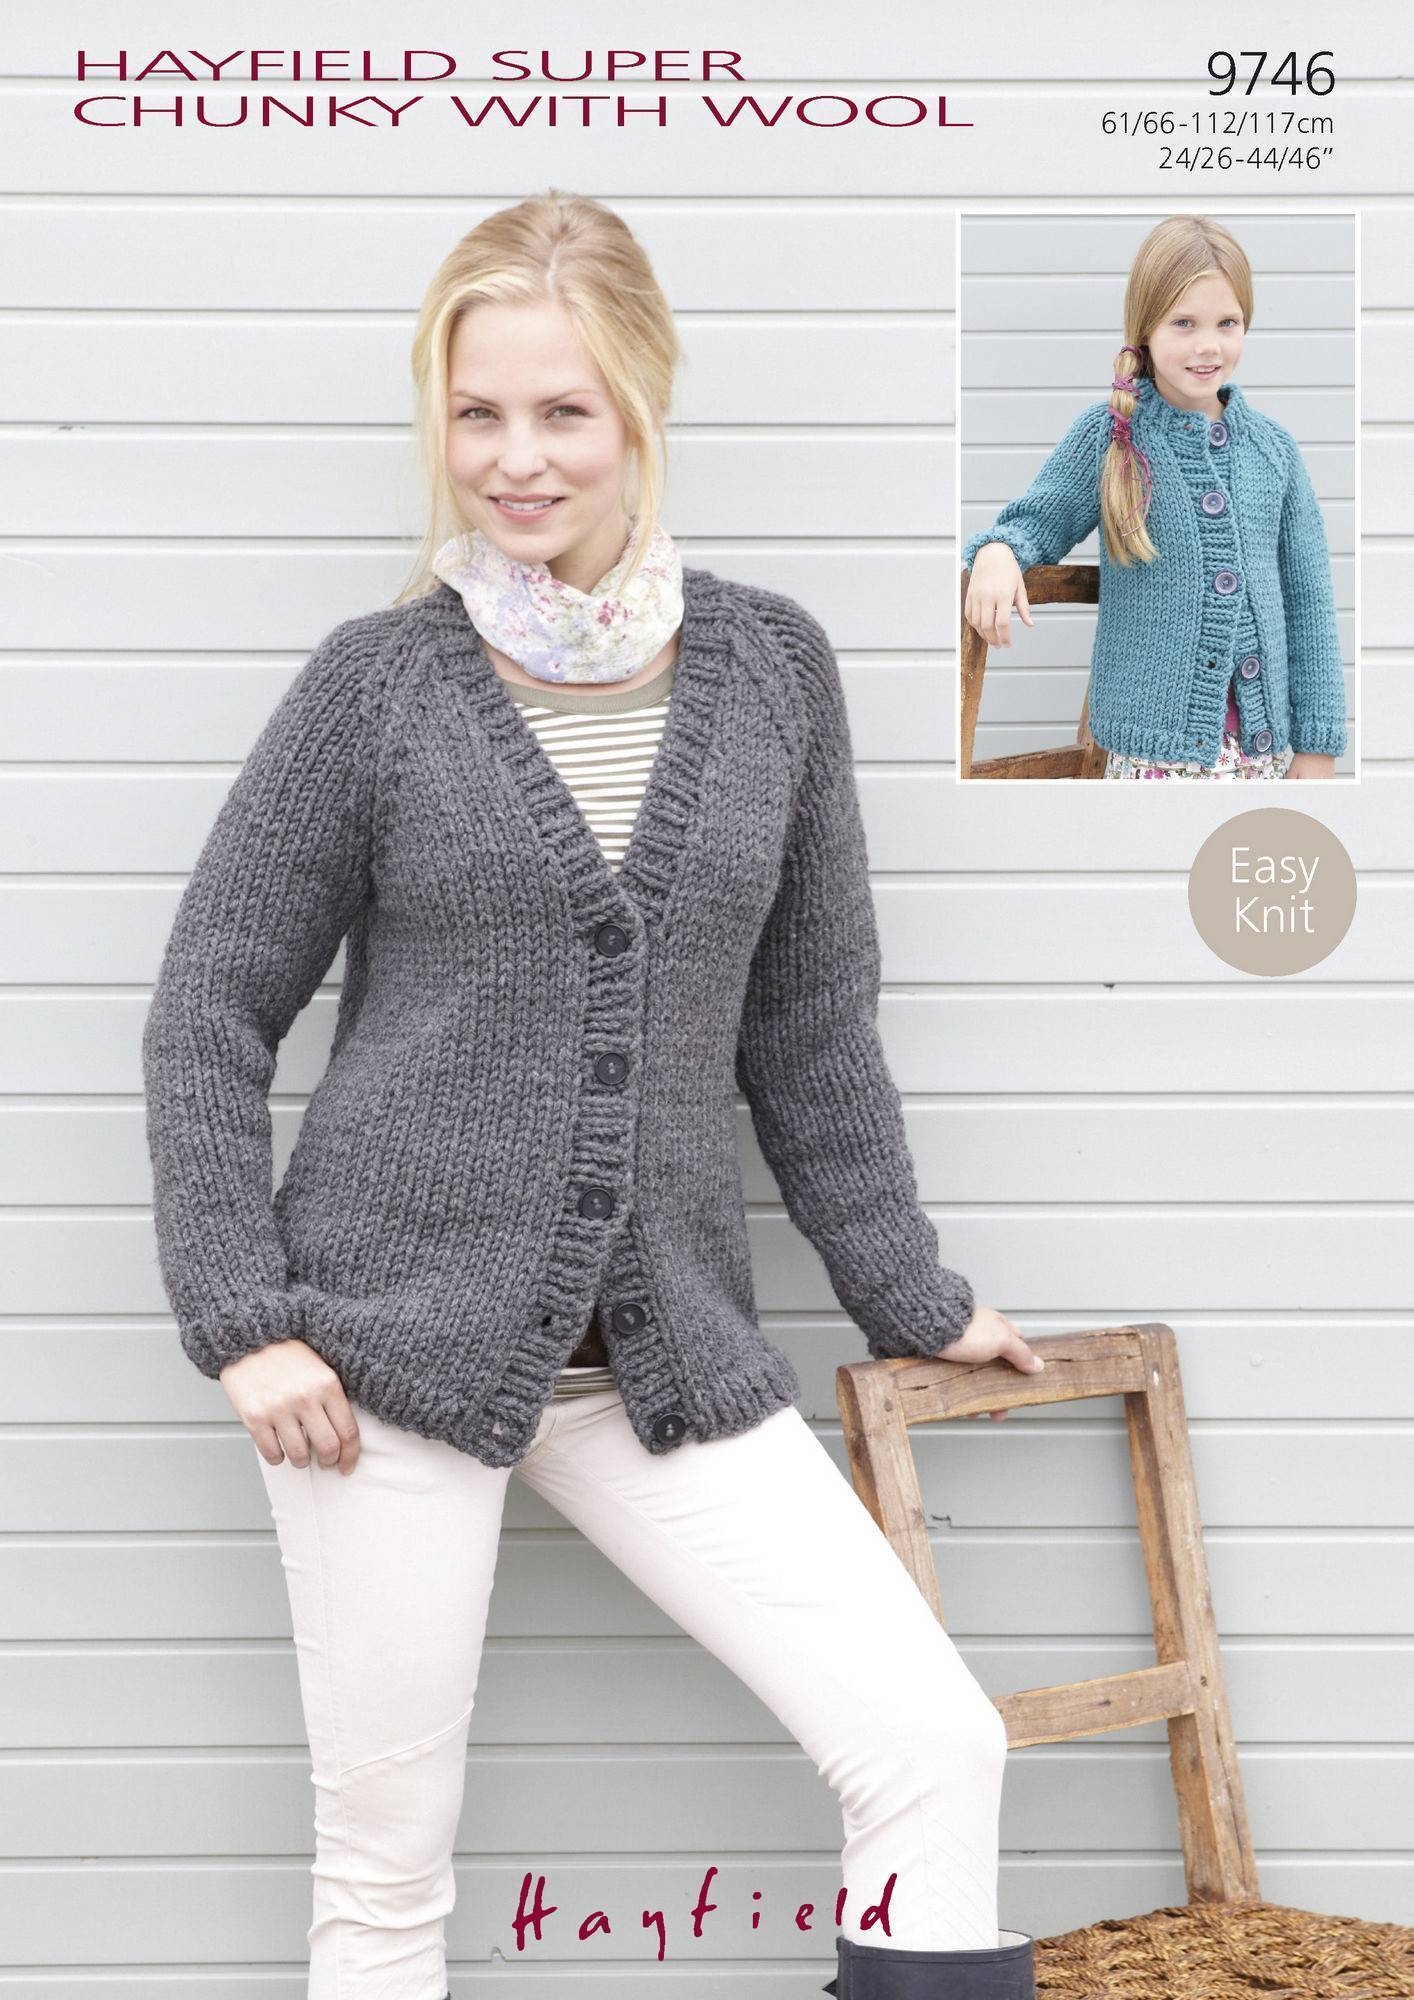 Raglan Cardigans in Hayfield Super Chunky with Wool (9746) | The ...